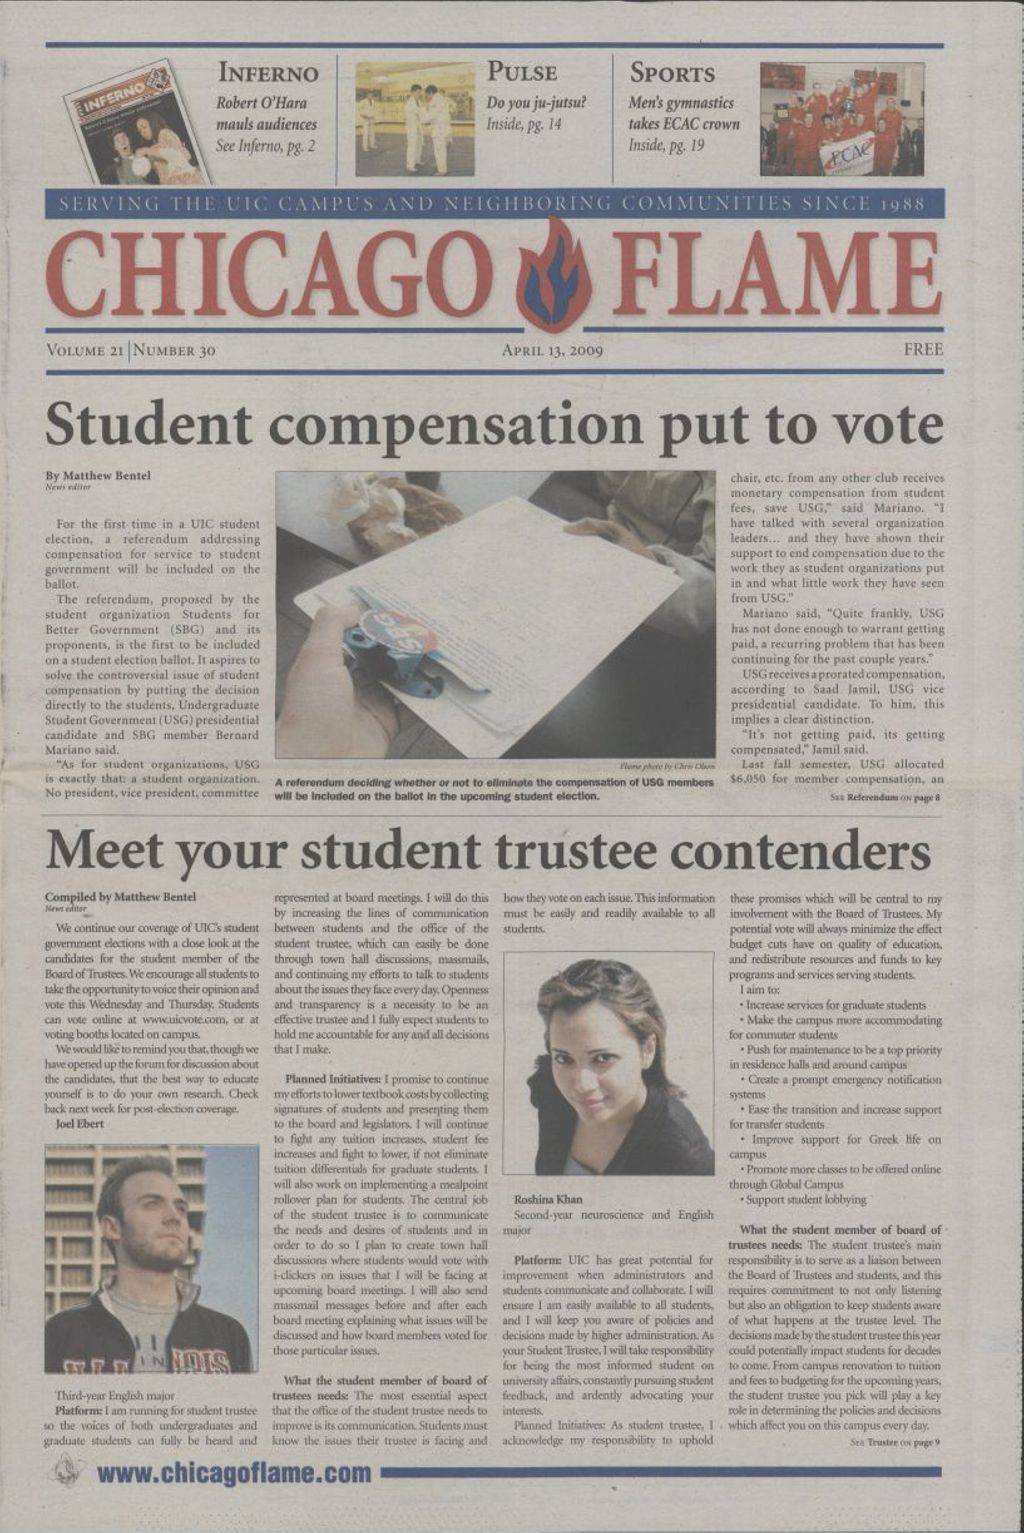 Miniature of Chicago Flame (April 13, 2009)